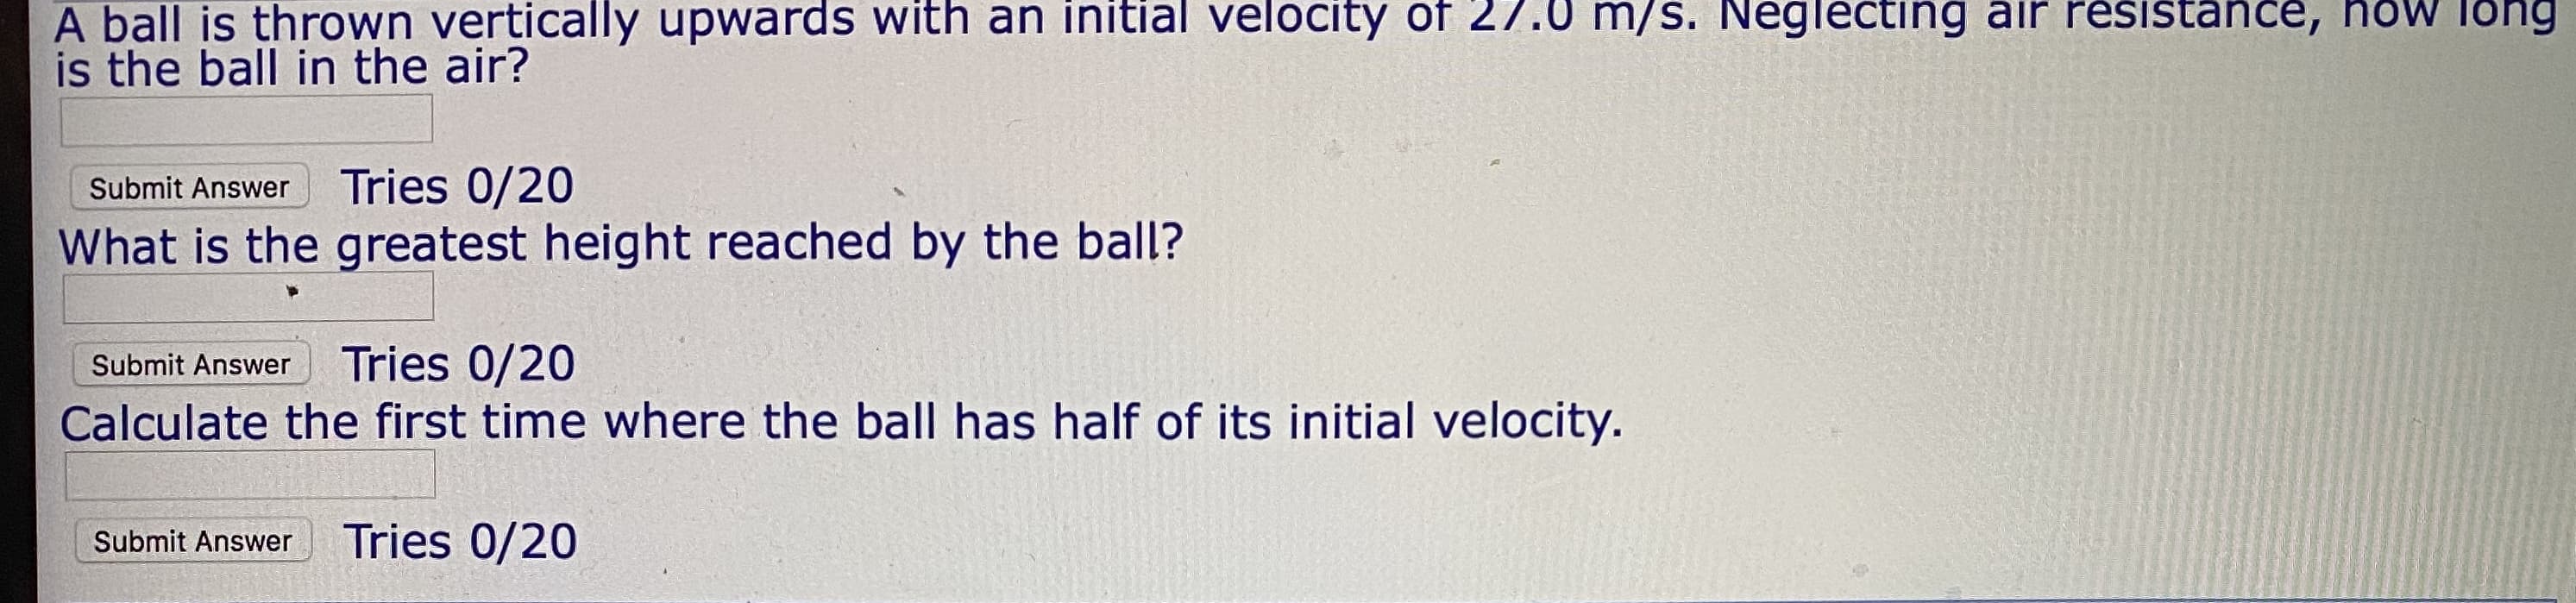 h an Initial 0f
velocity
A ball is thrown vertically upwaras with
is the ball in the air?
m/S. Neglecting air
Submit Answer
Tries 0/20
What is the greatest height reached by the ball?
Submit Answer
Tries 0/20
Calculate the first time where the ball has half of its initial velocity.
